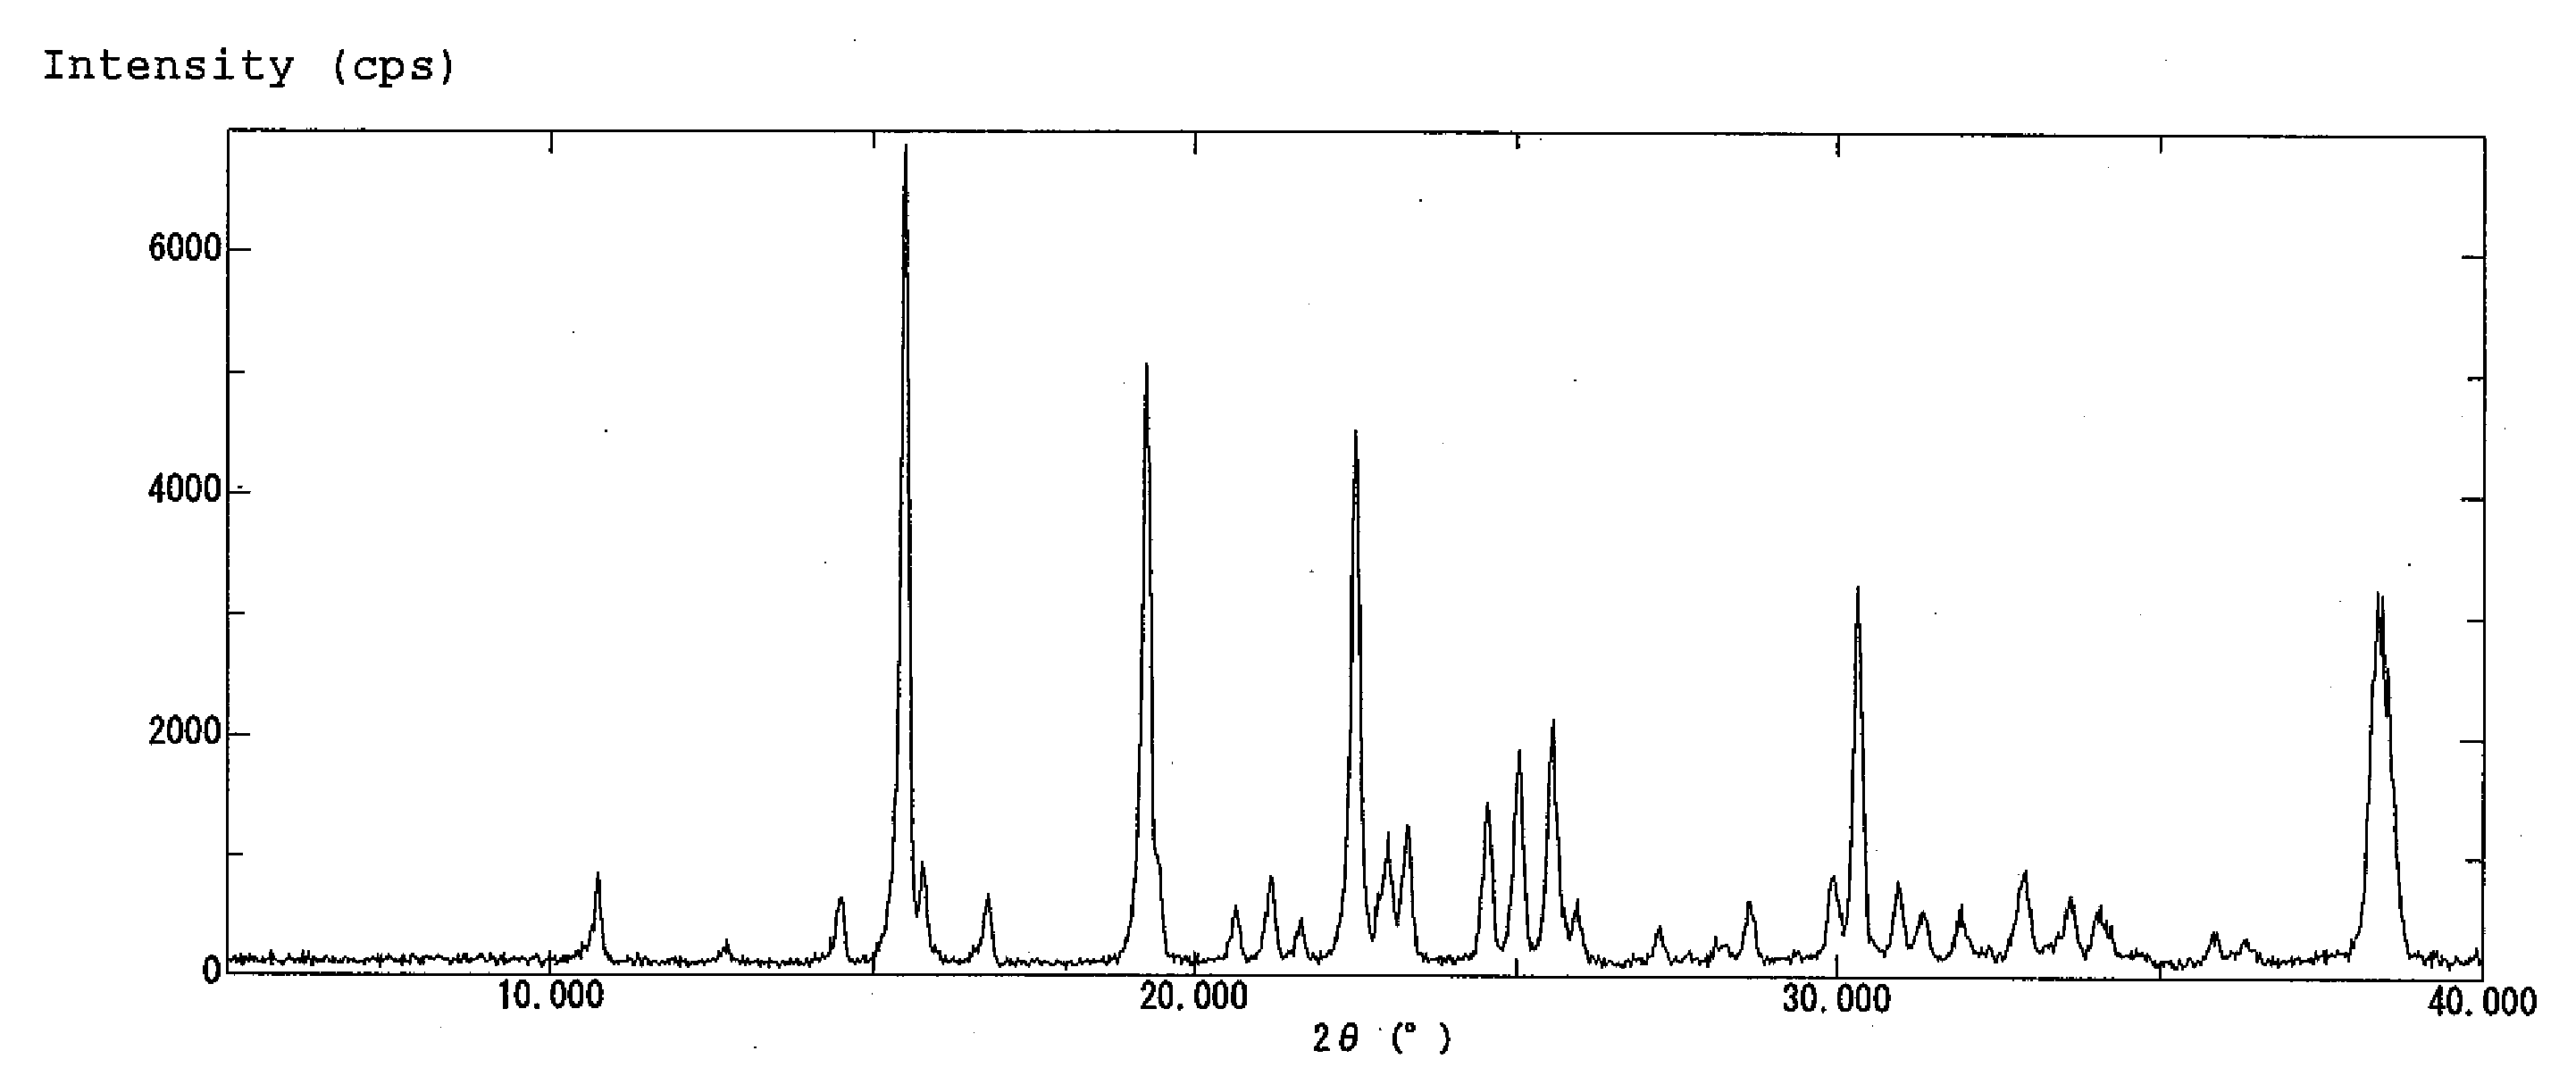 Production Method of Nitrogen-Containing Fused Ring Compounds